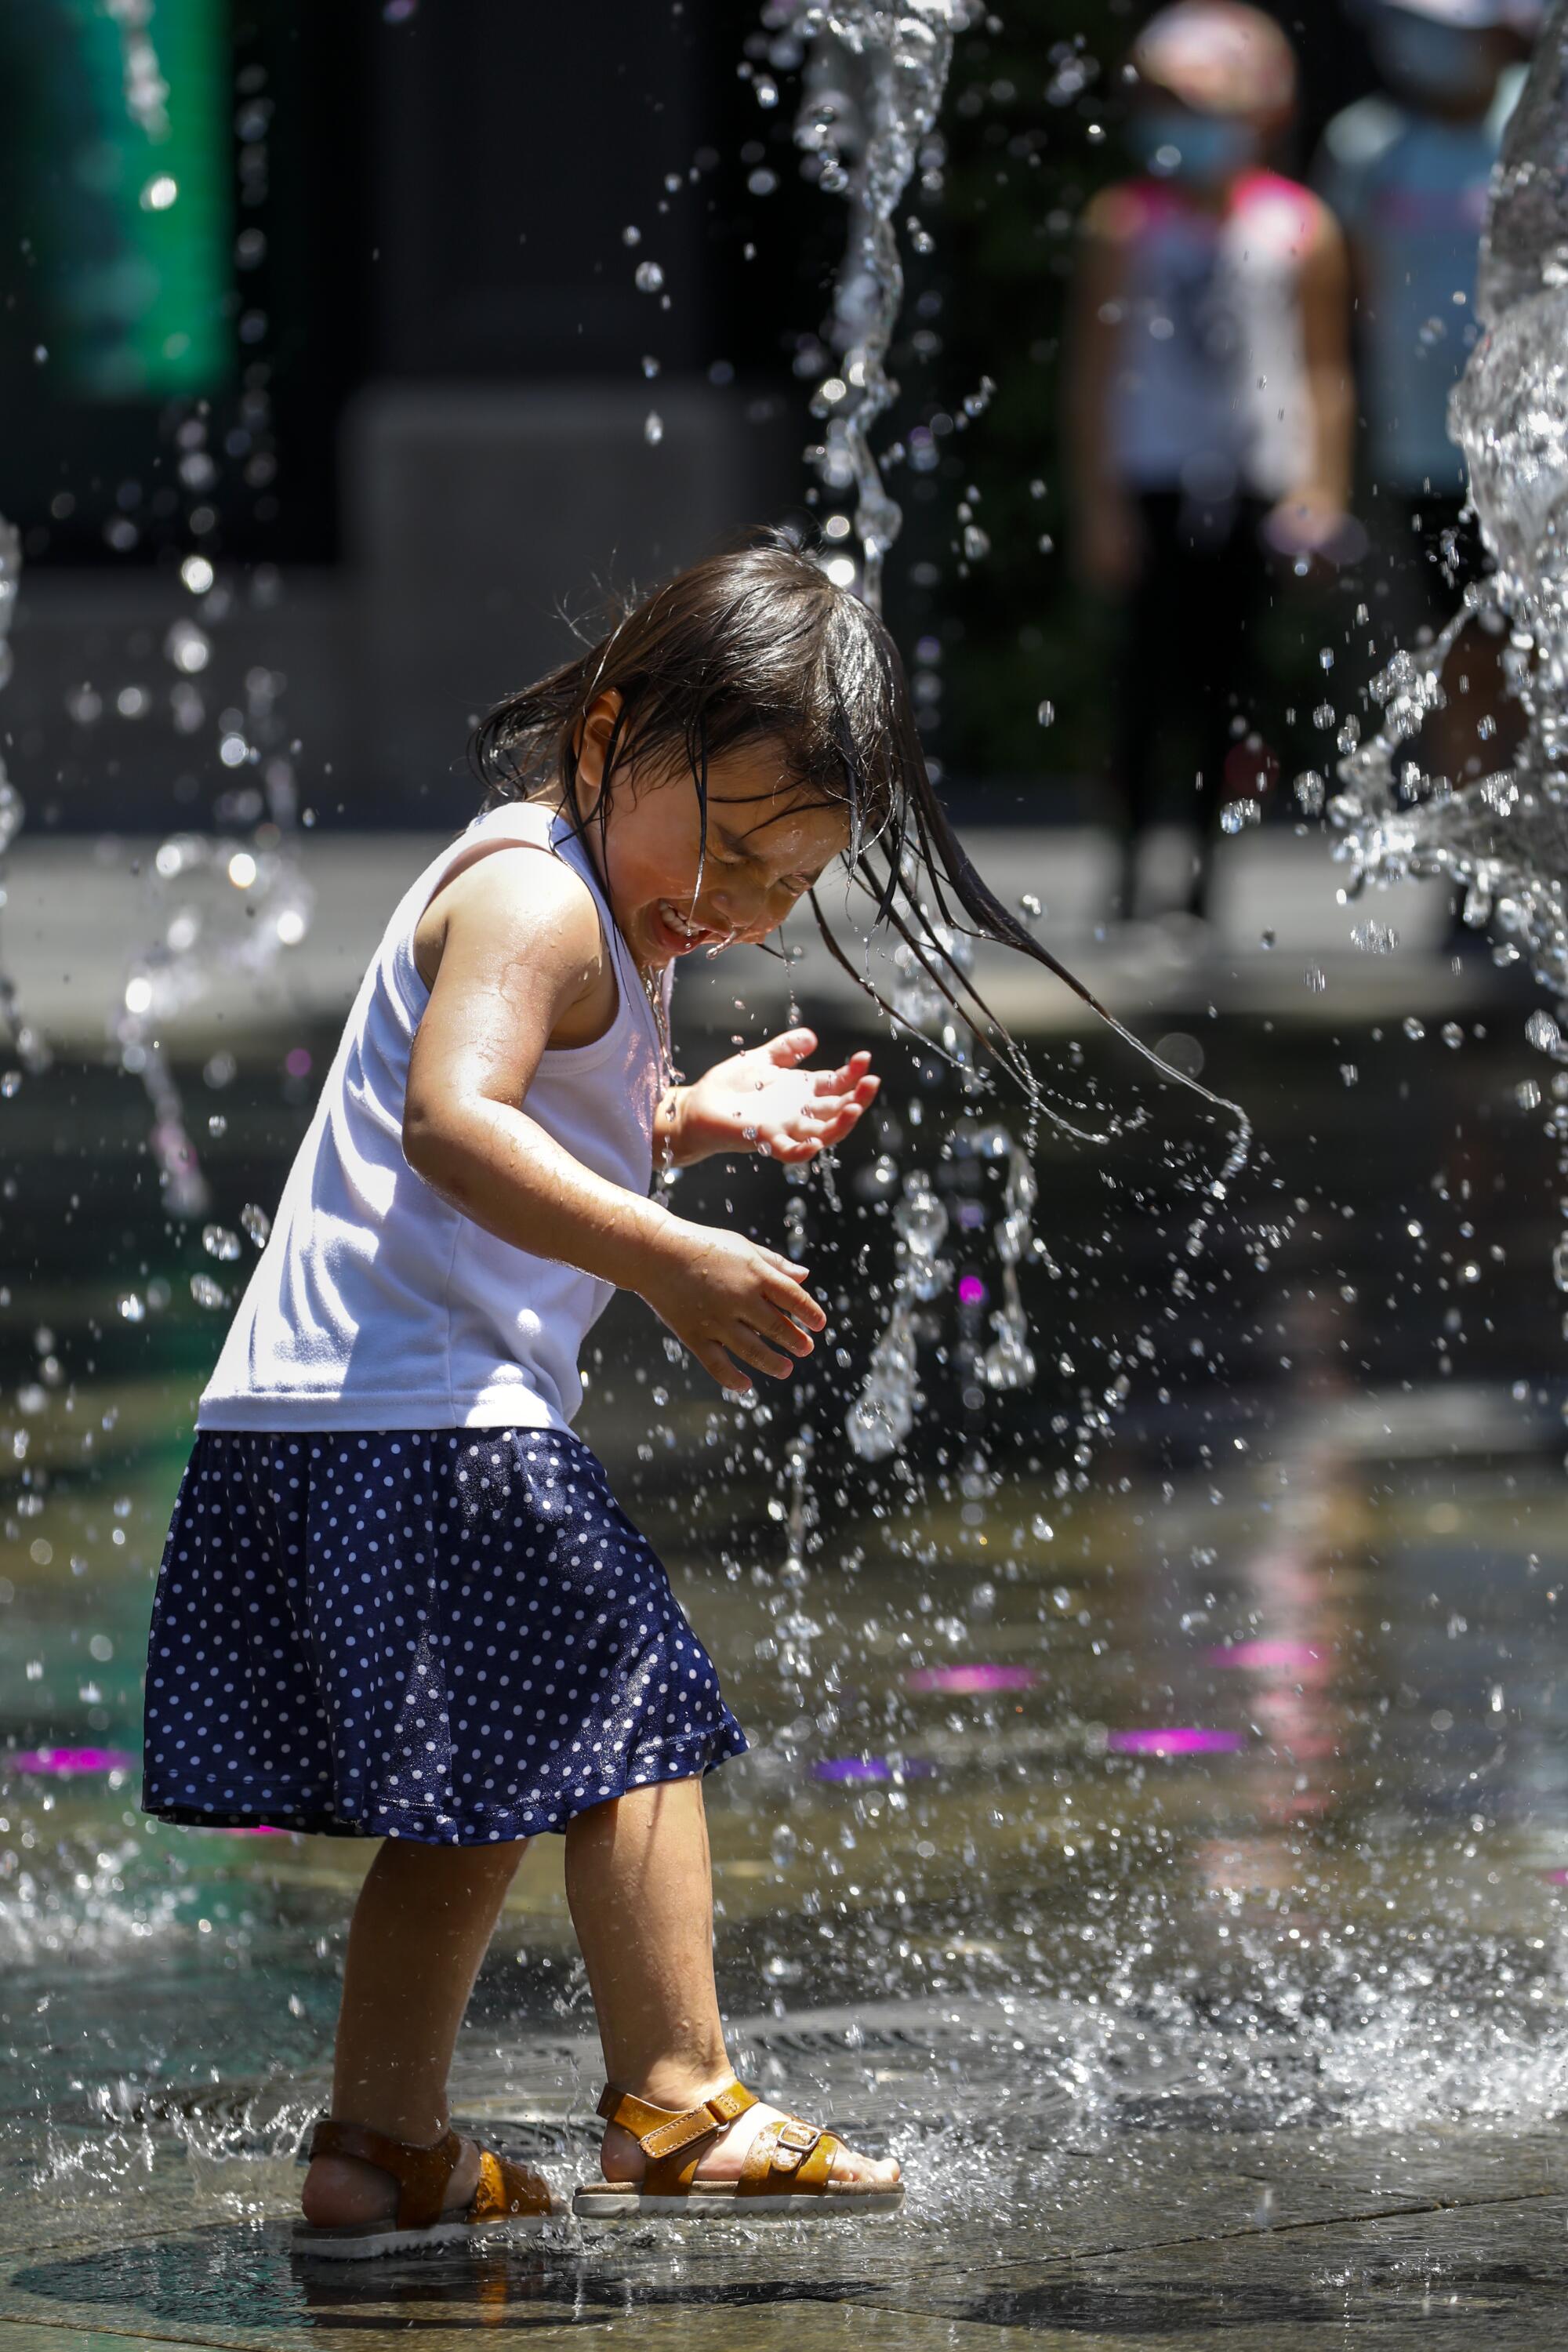 A small child plays in a public water fountain